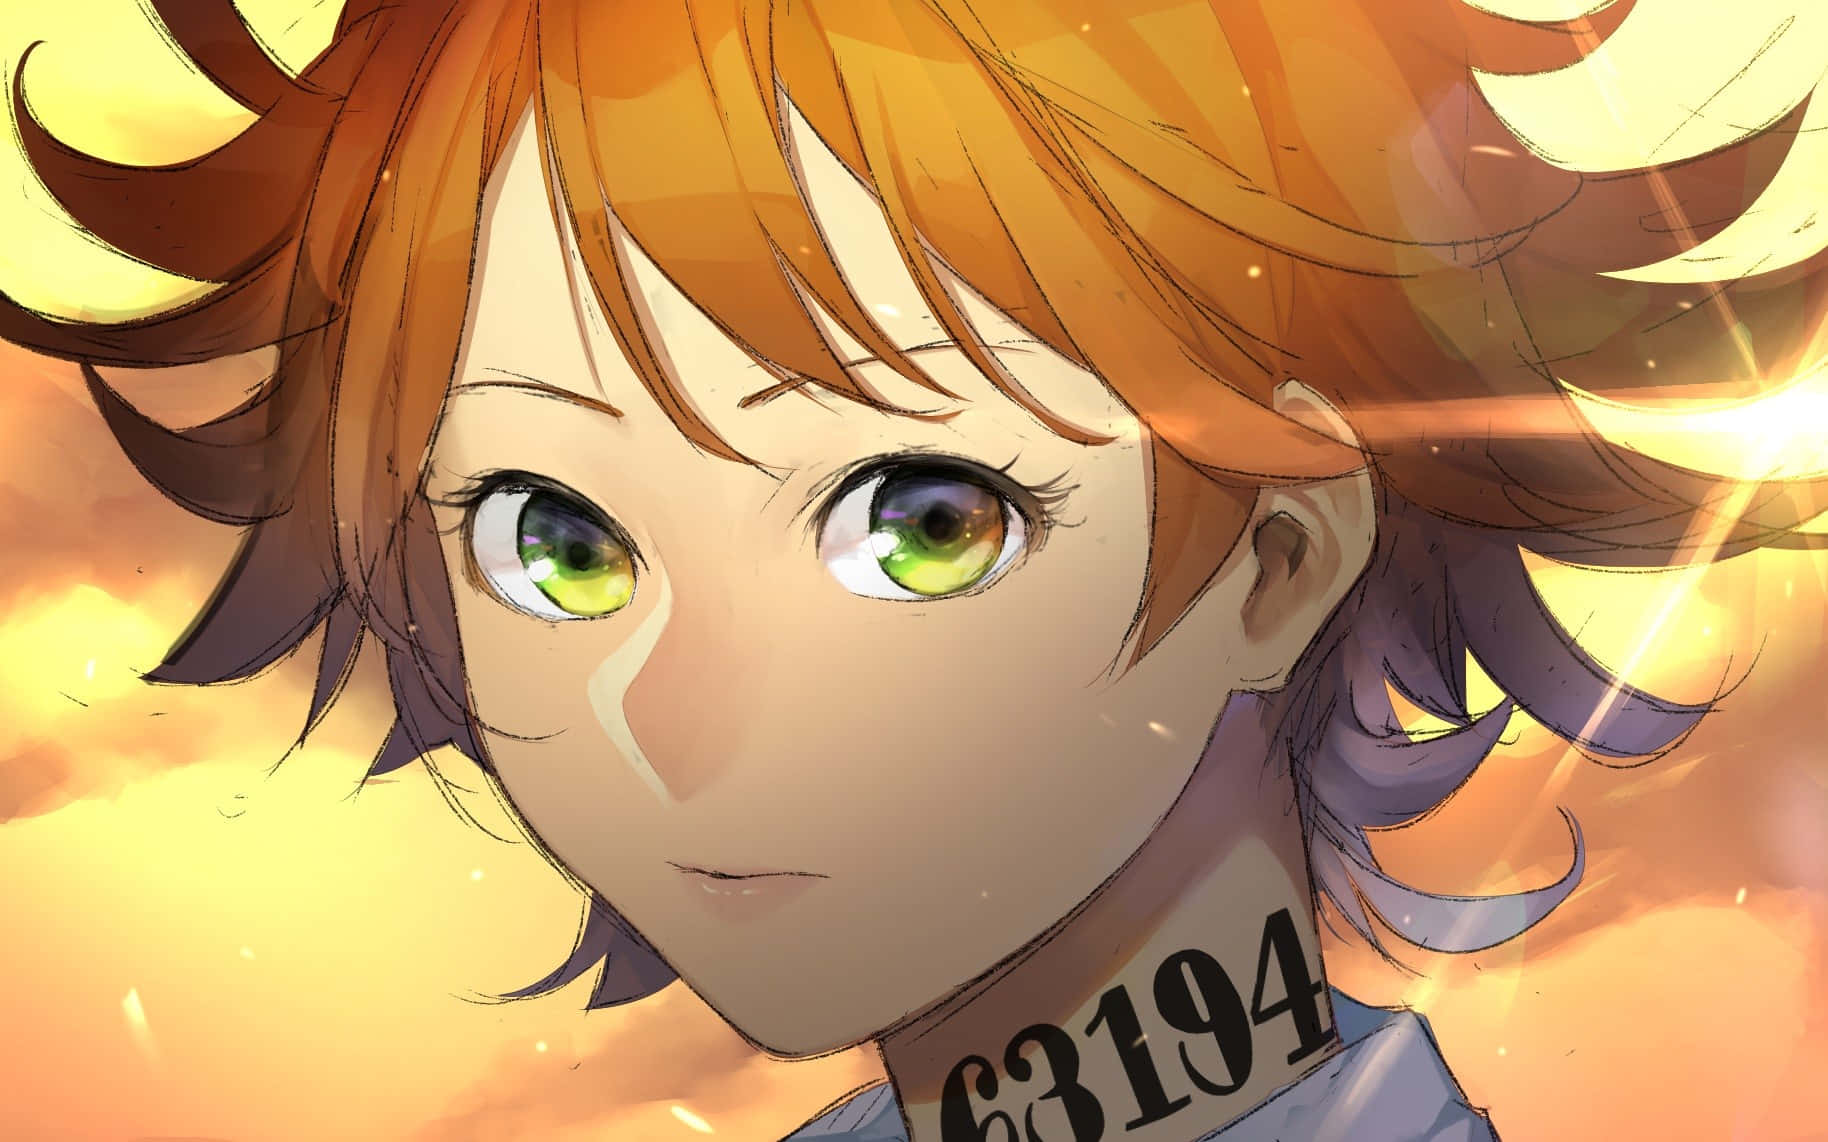 Emma from The Promised Neverland. Wallpaper